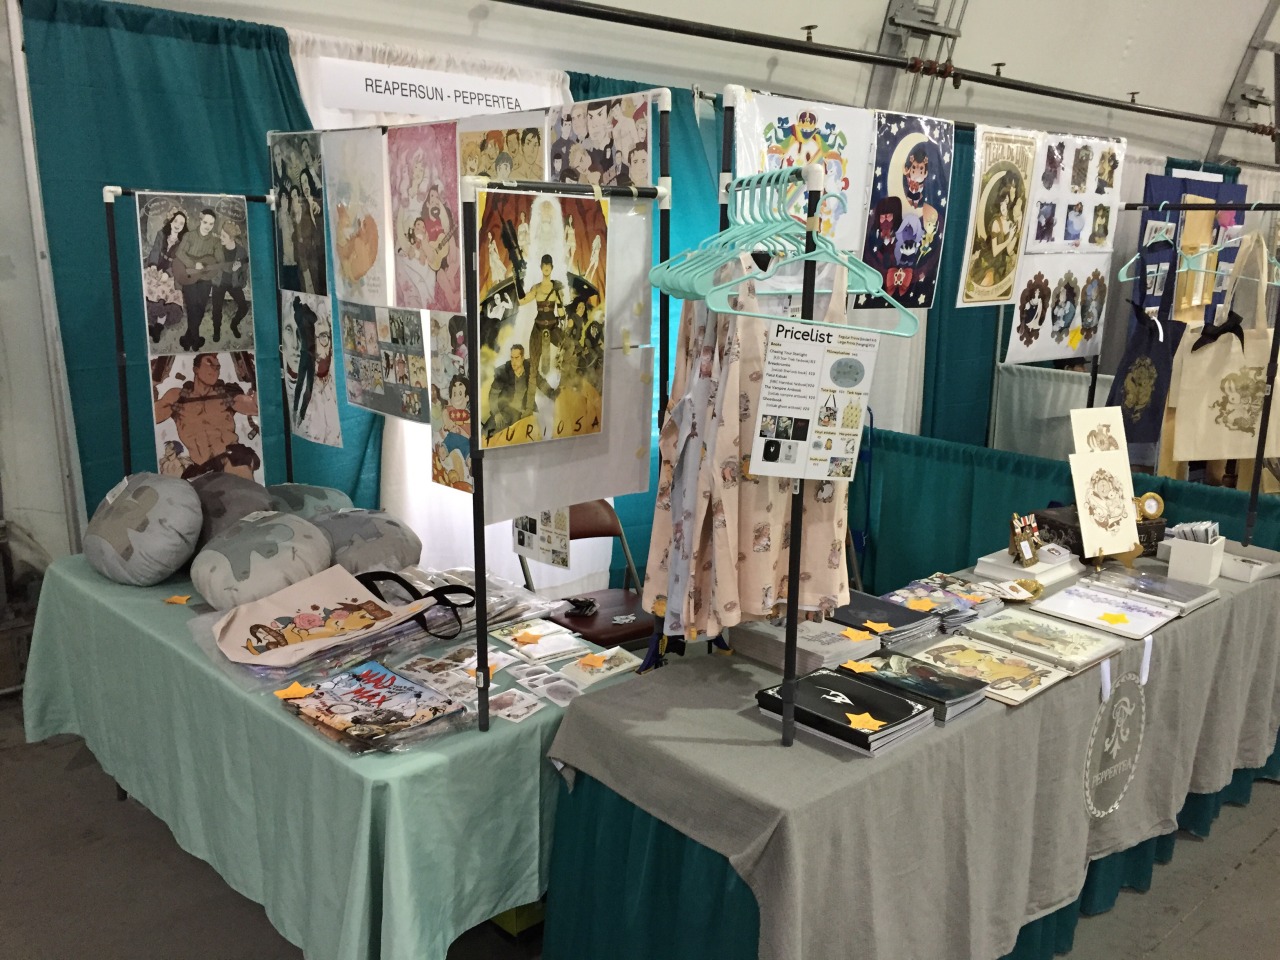 Our table at APE :)  I’m really happy with our table setup this time; its too bad